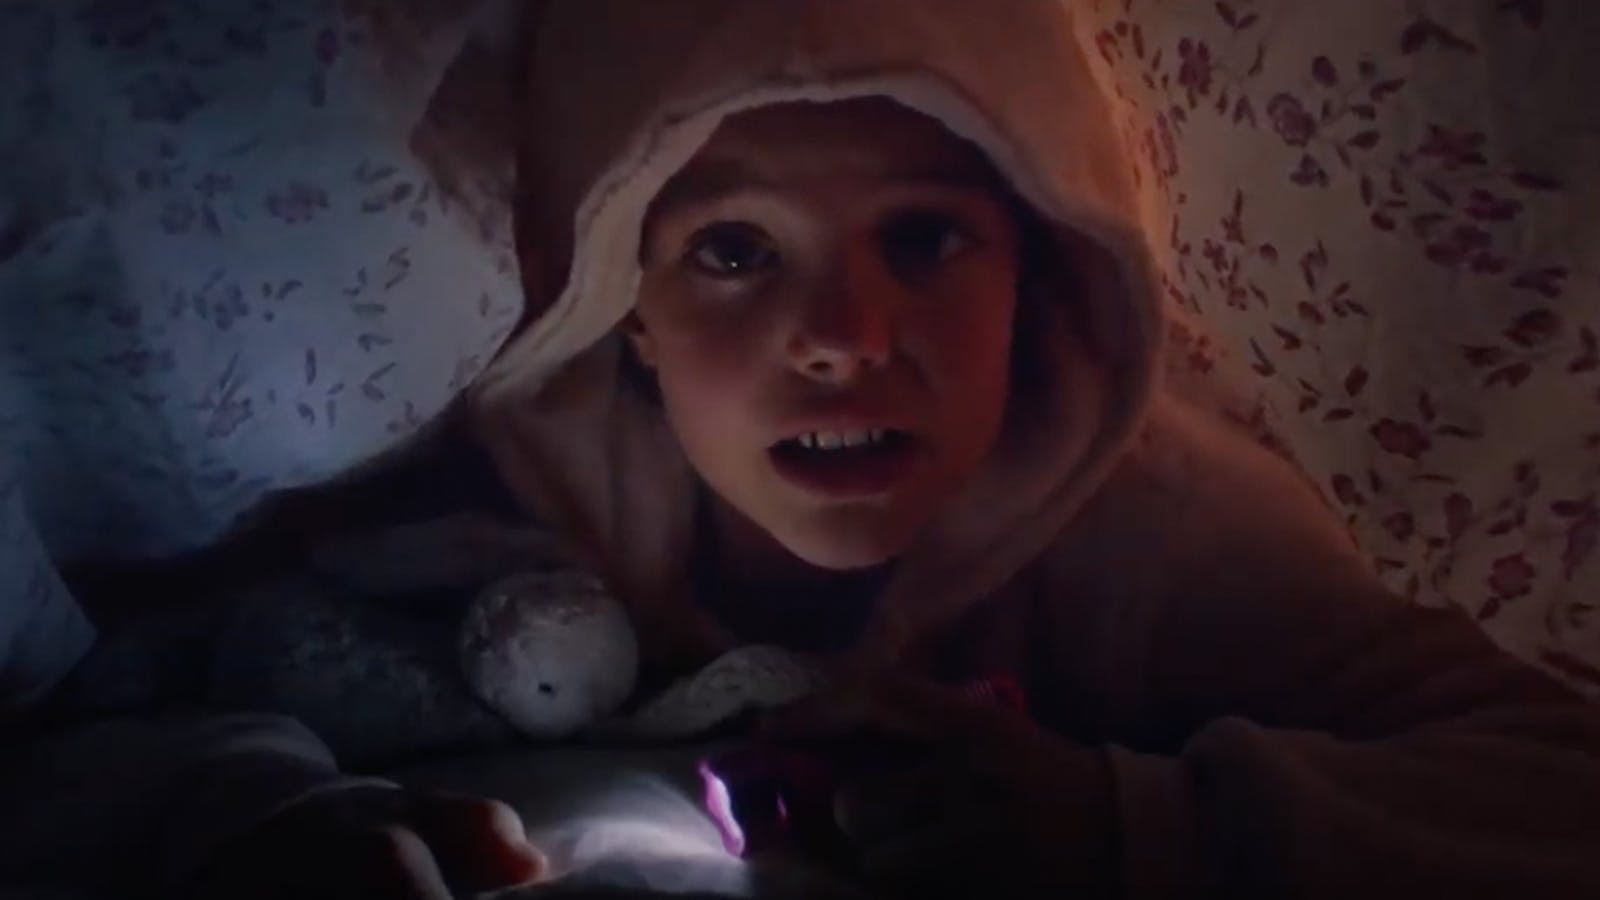 A young scared child holds onto his plushie underneath the covers for the “Monsters” LifeBridge campaign.